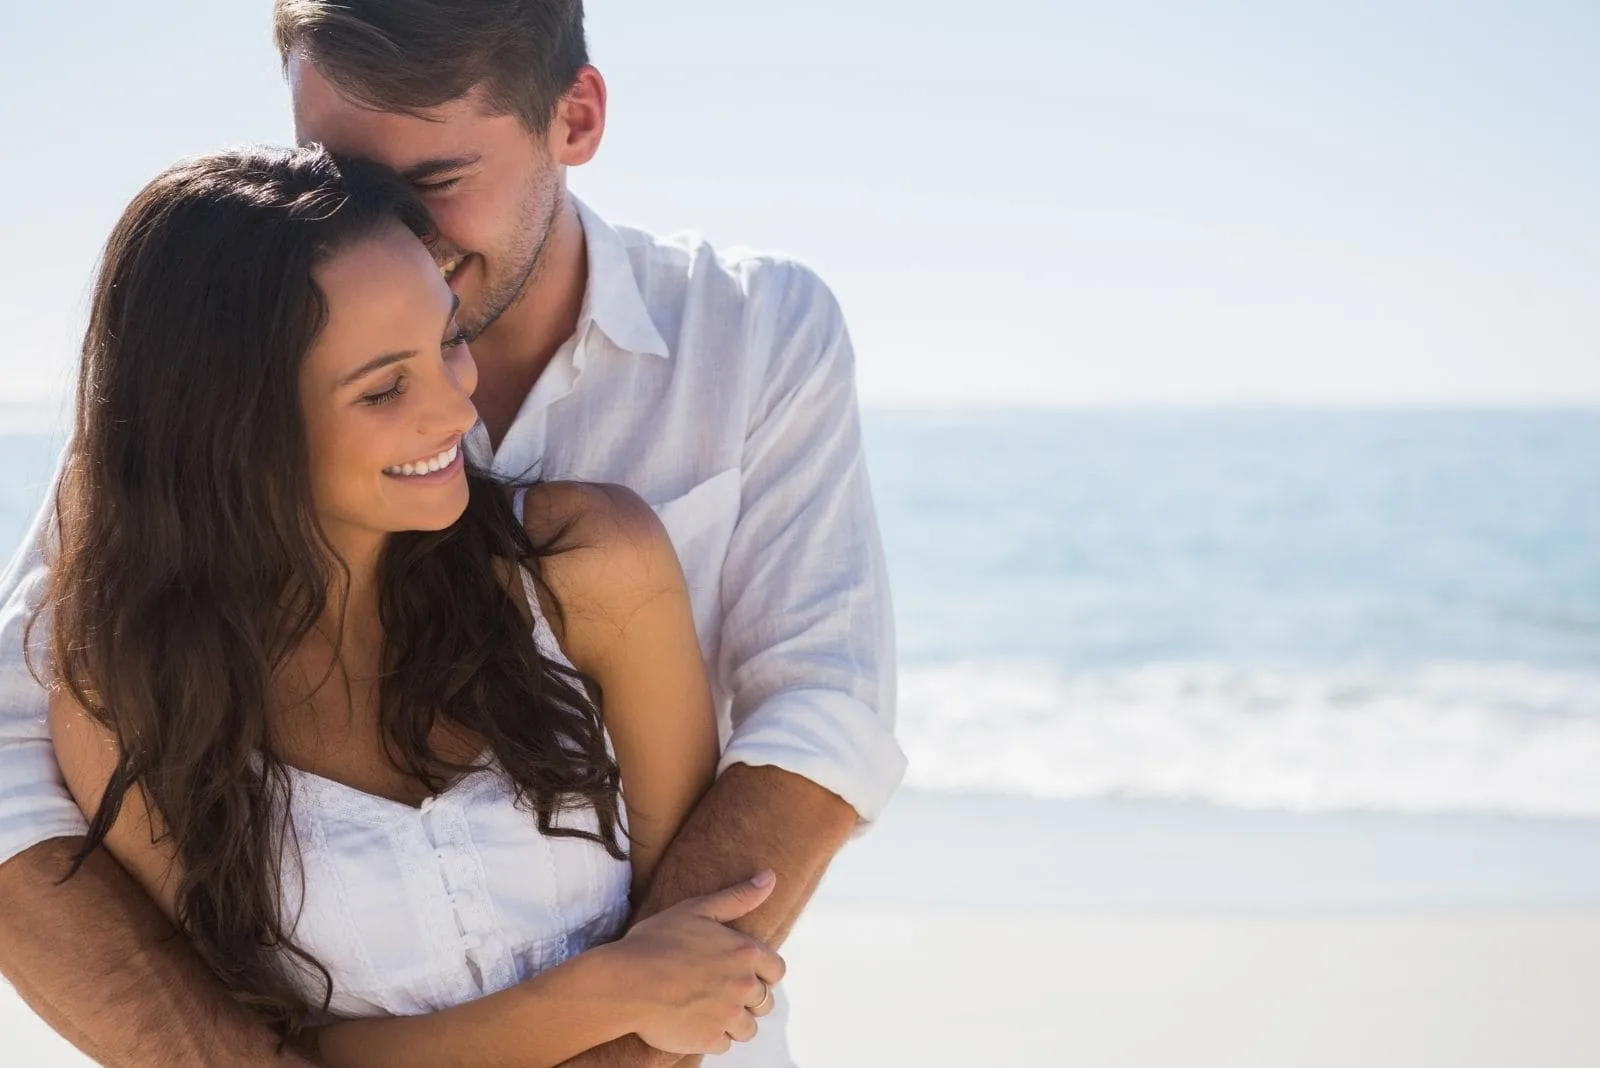 romantic man hugging his girlfriend standing in the beach with the sea as the background